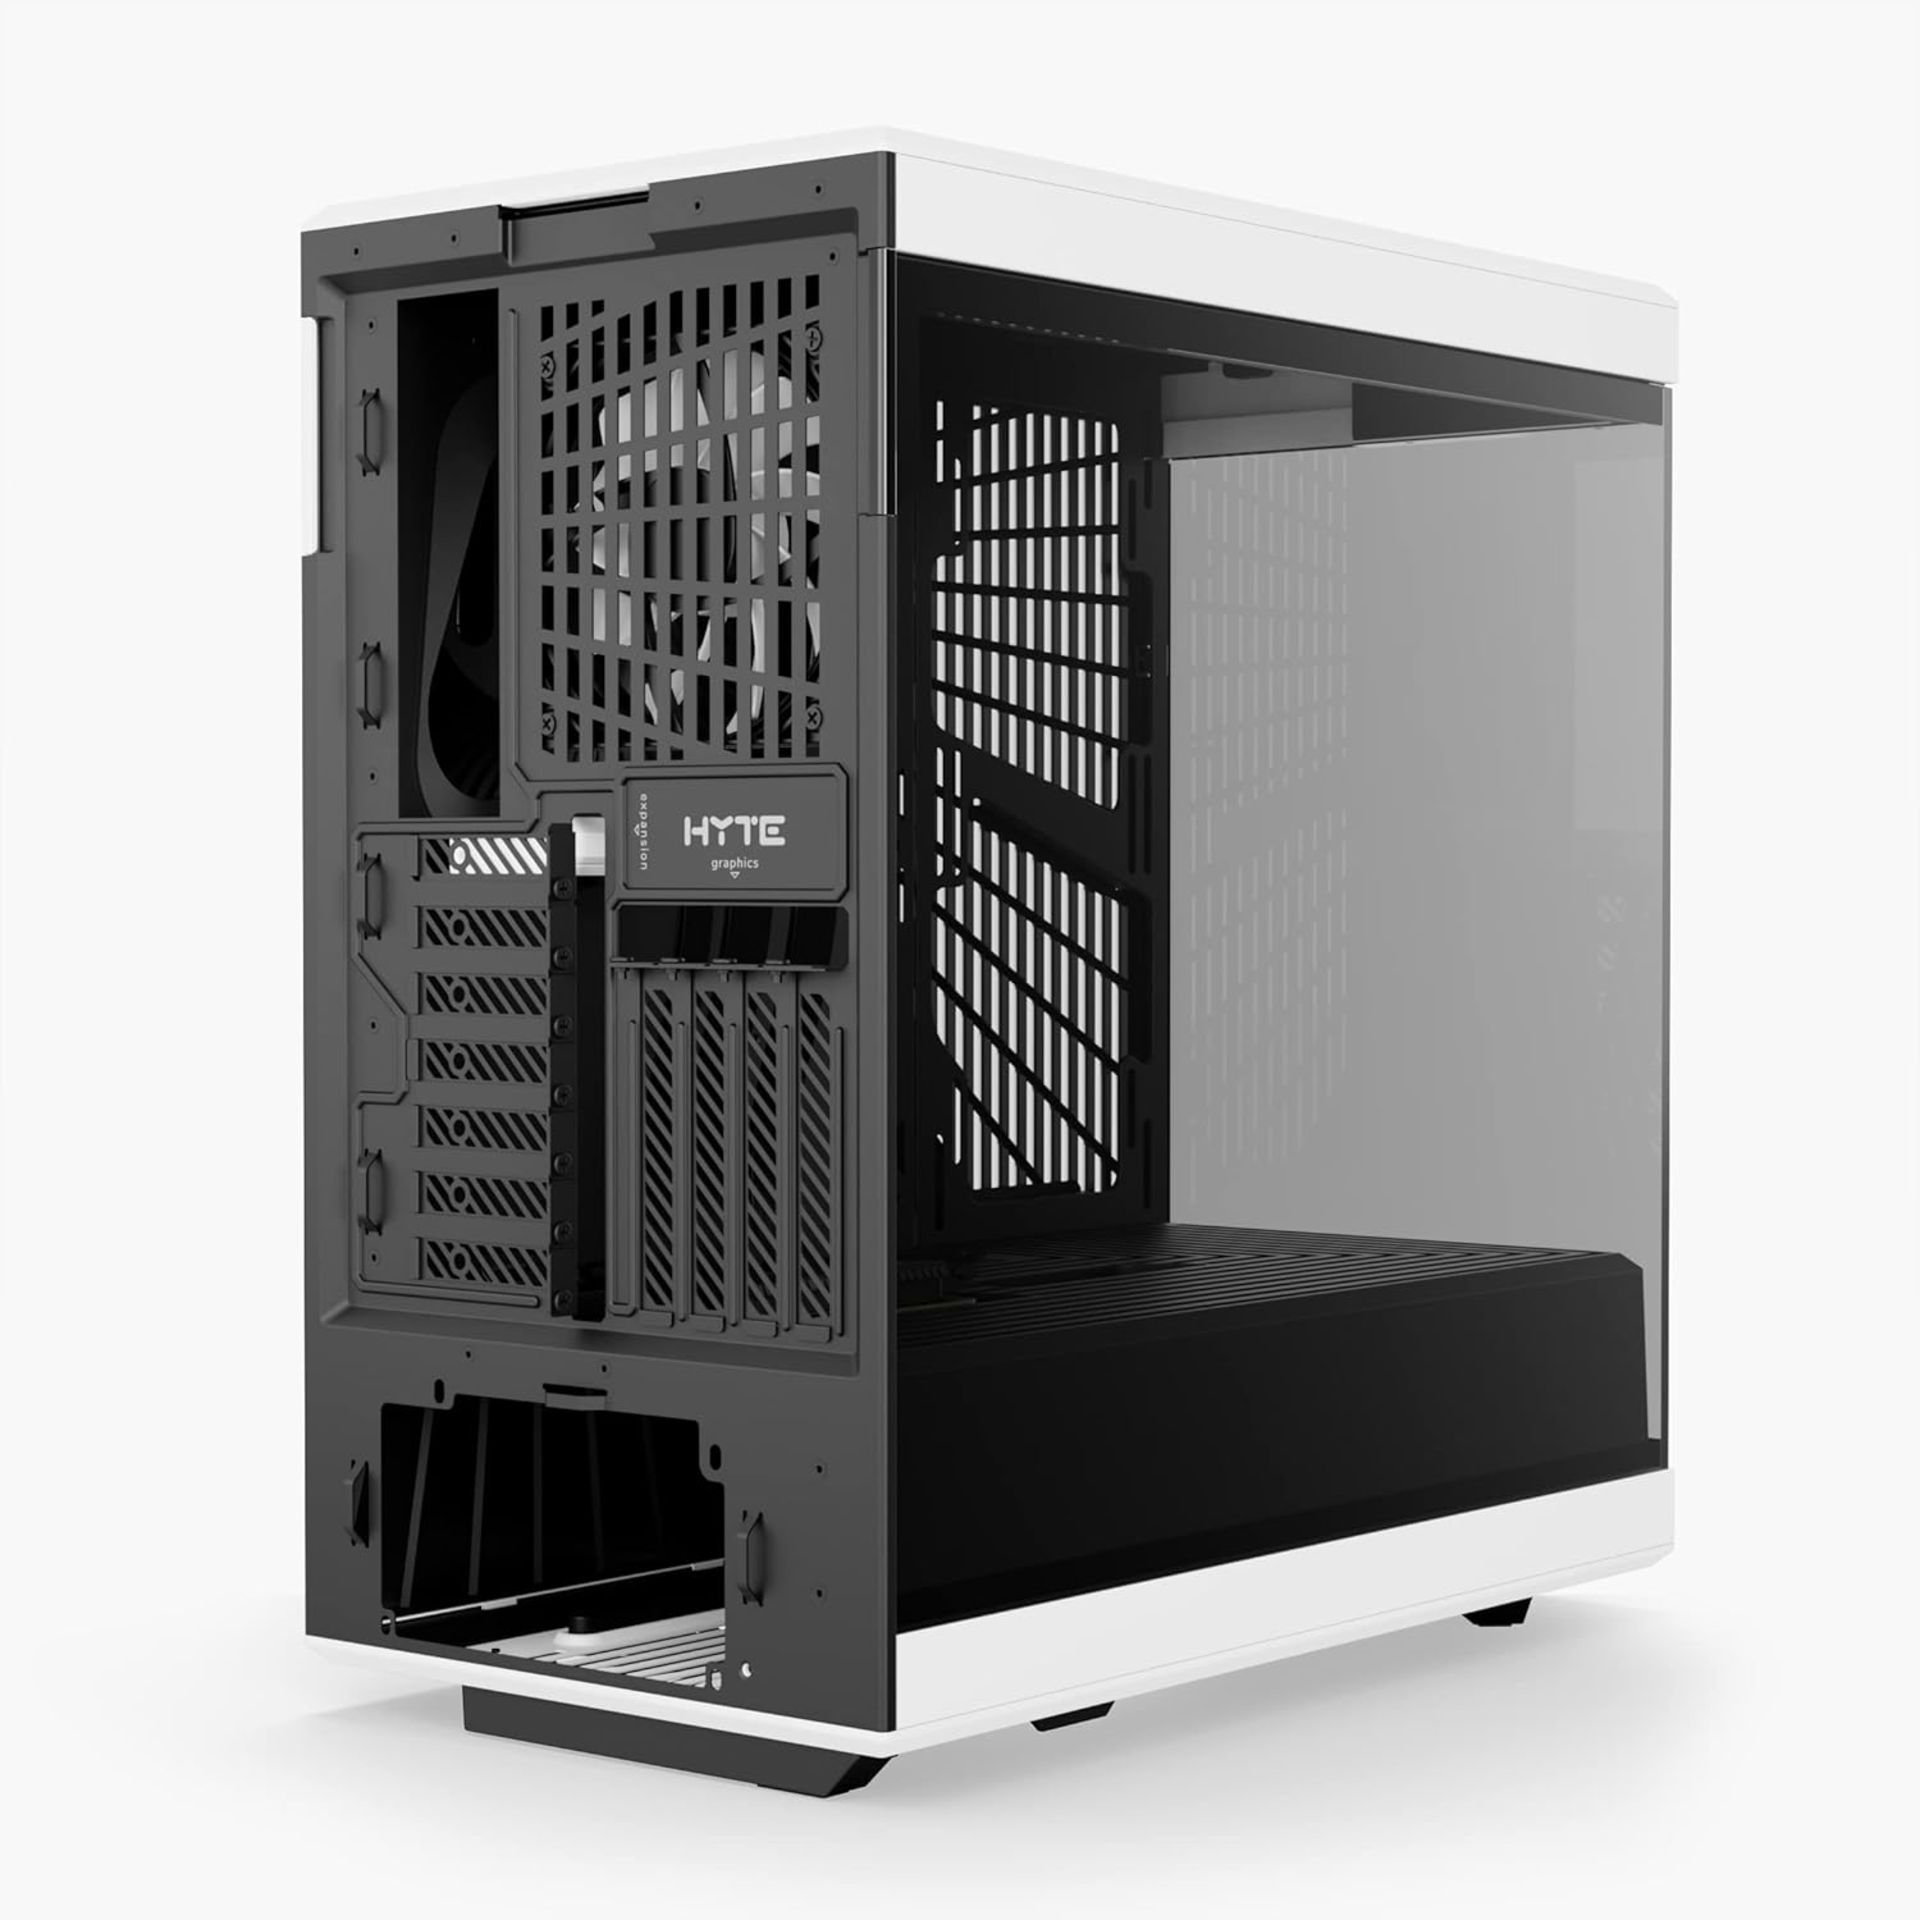 NEW & BOXED HYTE Y40 Mid-Tower ATX Case - Black & White. RRP £159.98. (R15R). The HYTE Y40 Mid-Tower - Image 5 of 6